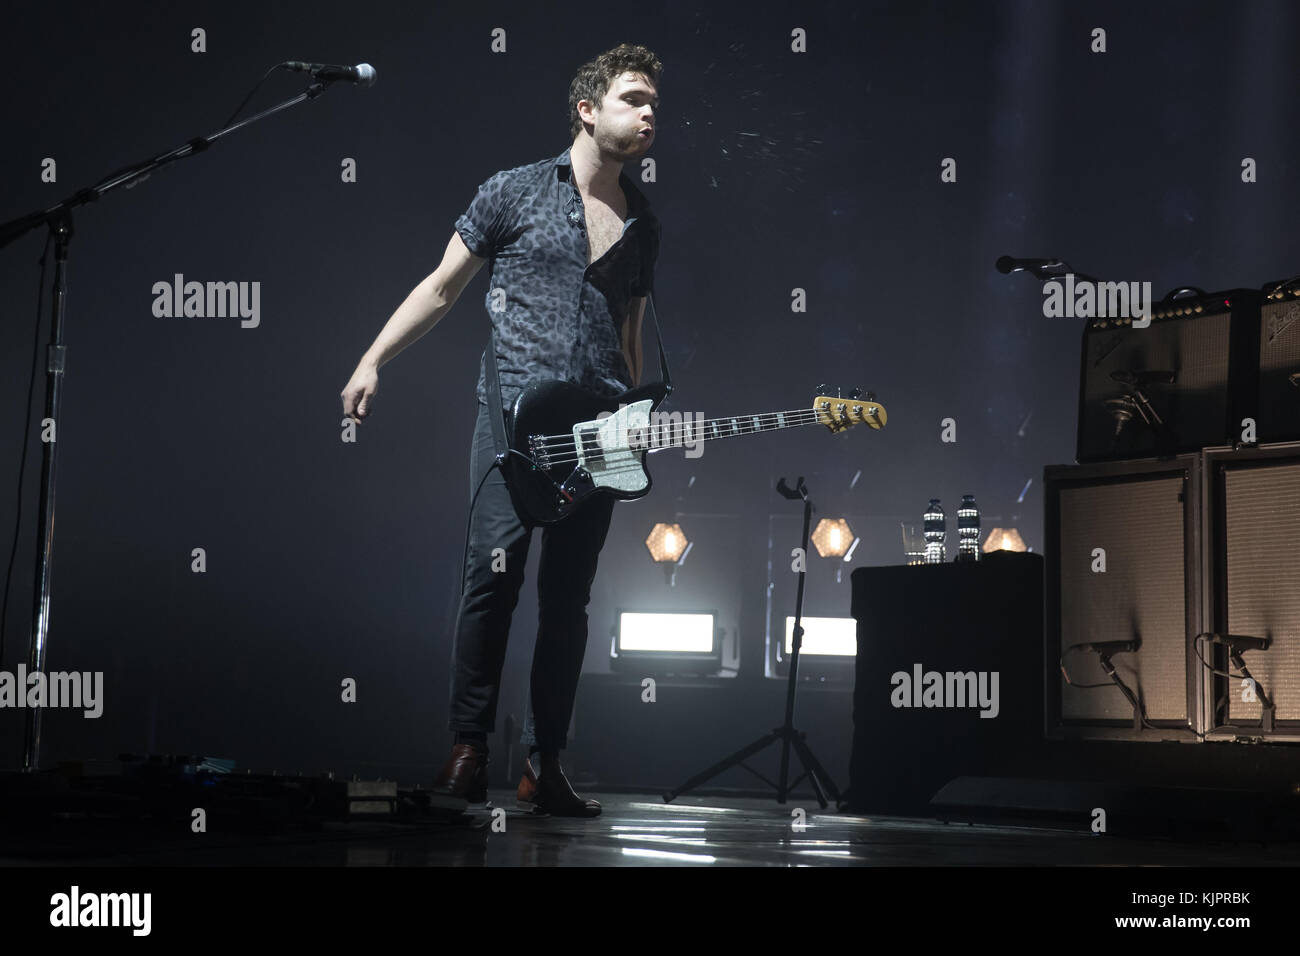 Brighton, UK. 29th Nov, 2017. Royal Blood performing the final night of a sellout hometown show at The Brighton Centre, England. Credit: Jason Richardson/Alamy Live News Stock Photo